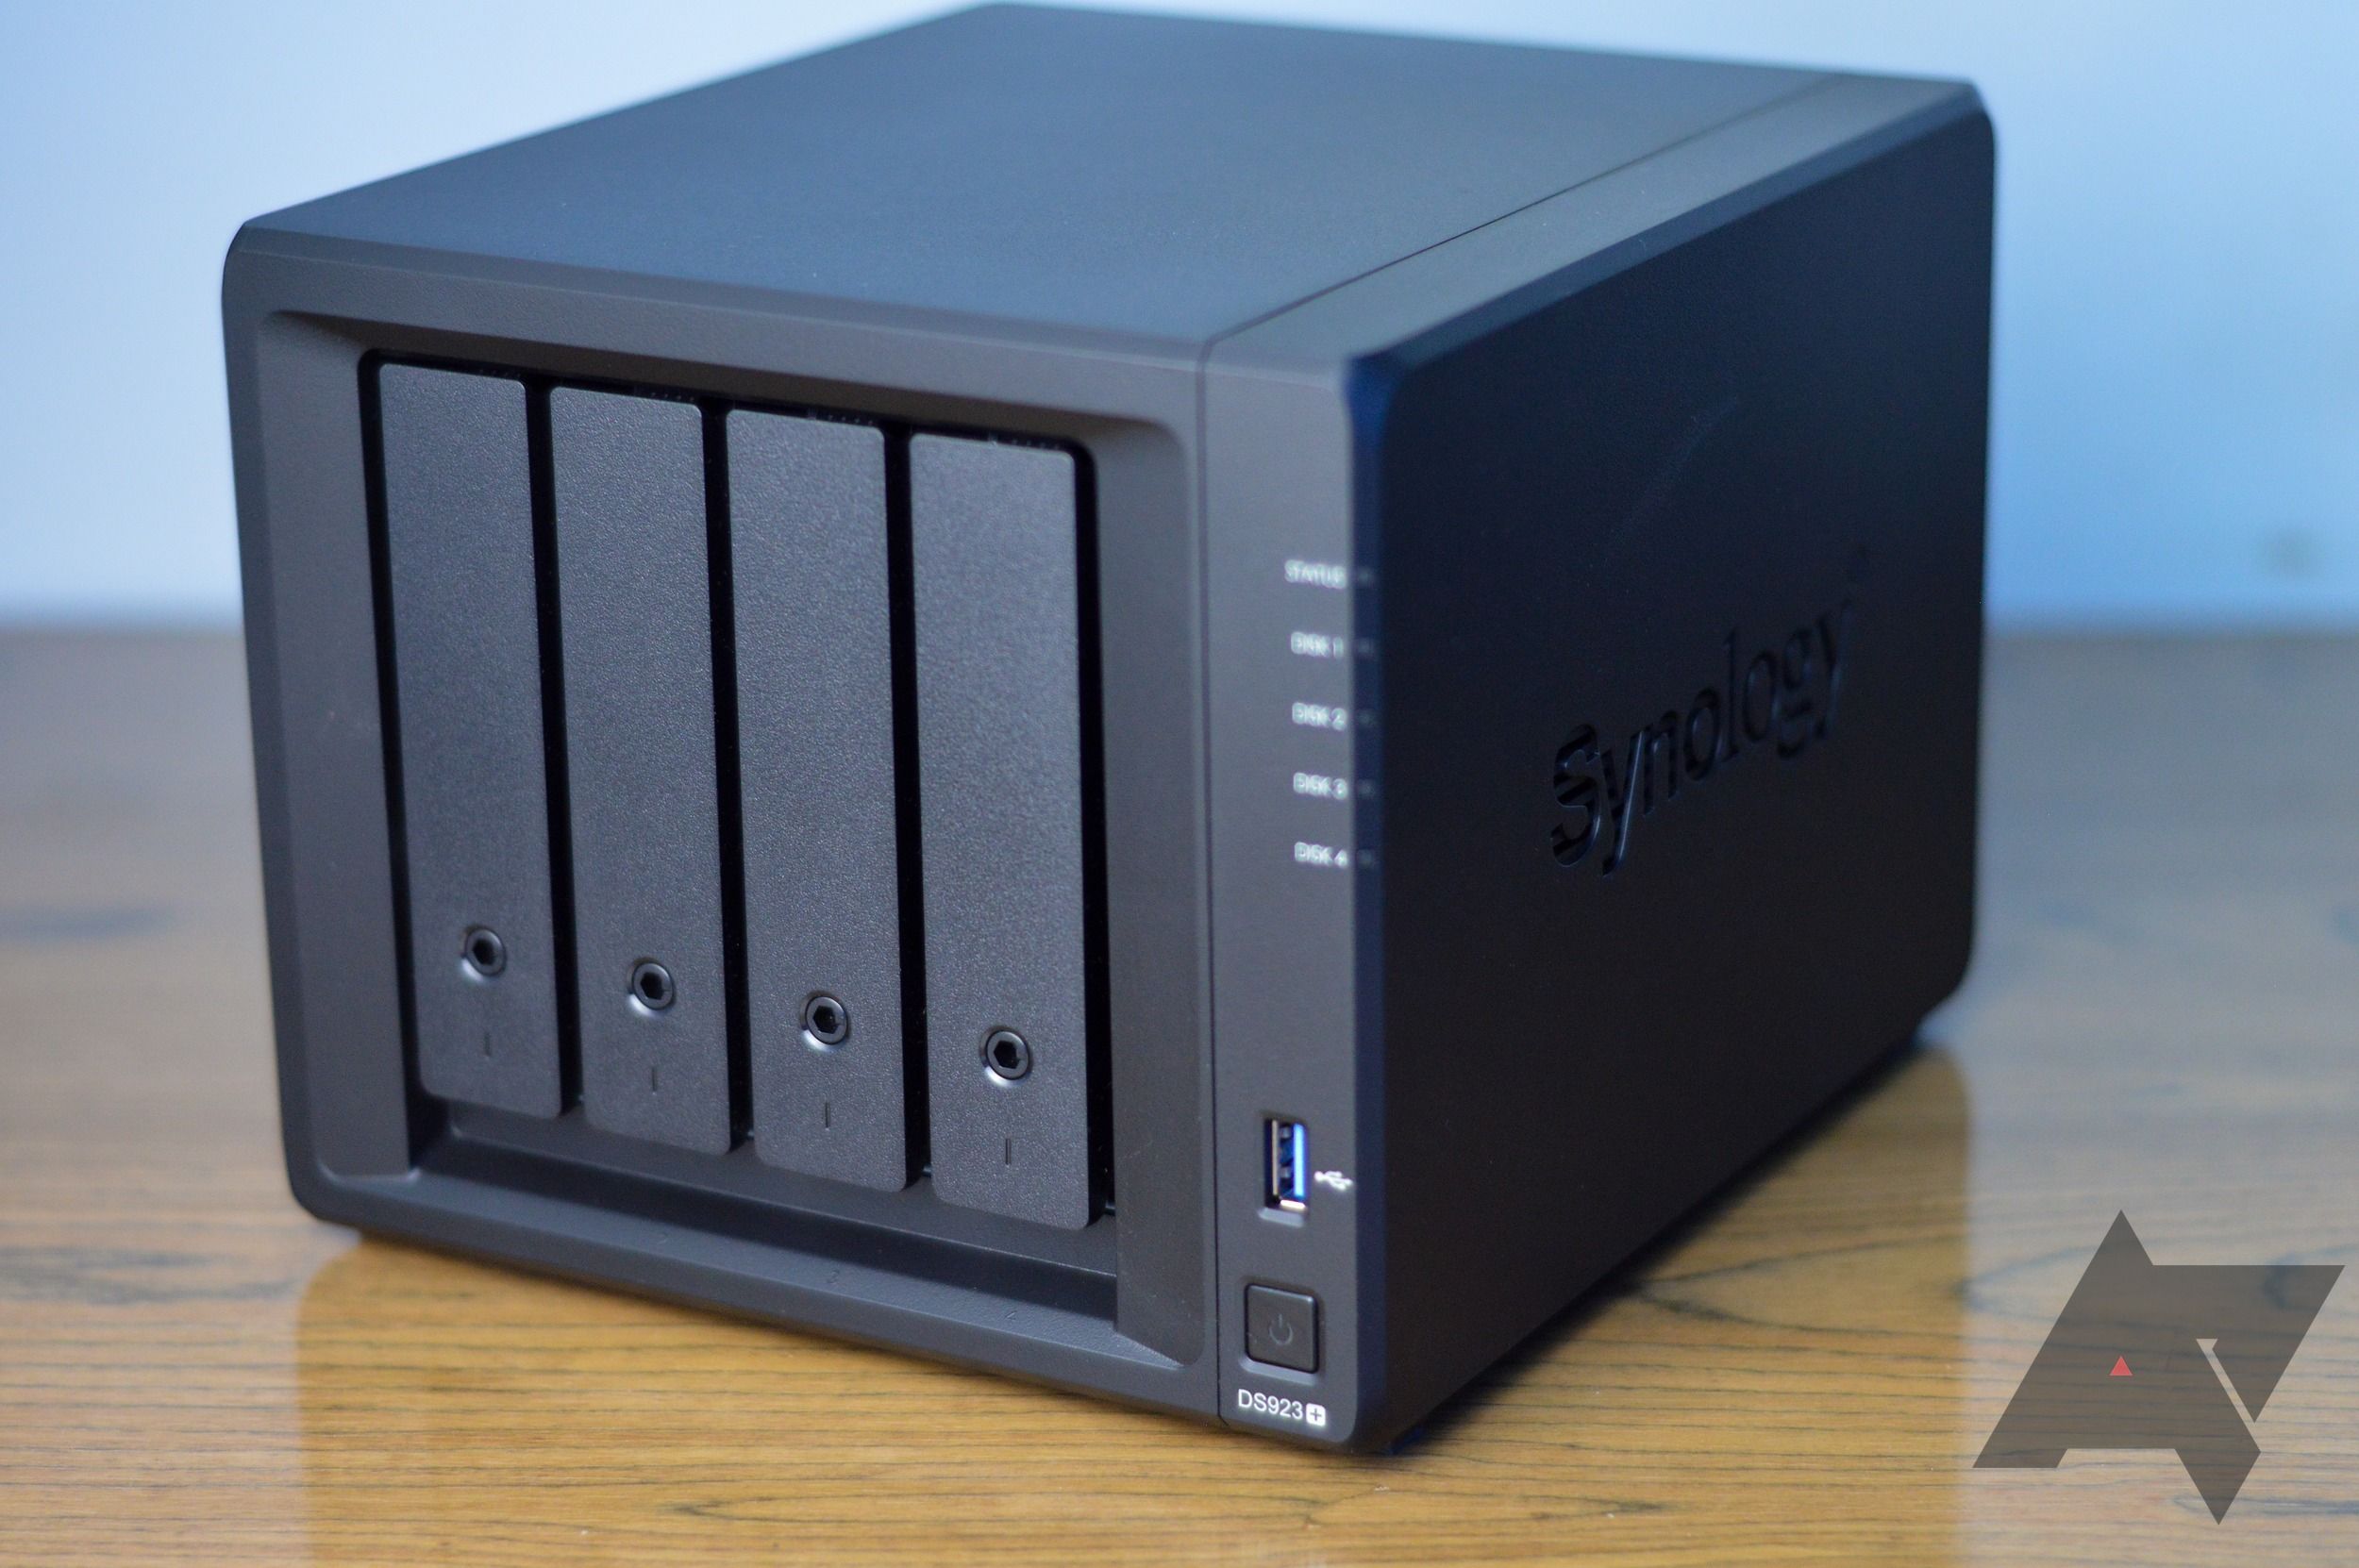 Synology-DiskStation-DS923-plus-1